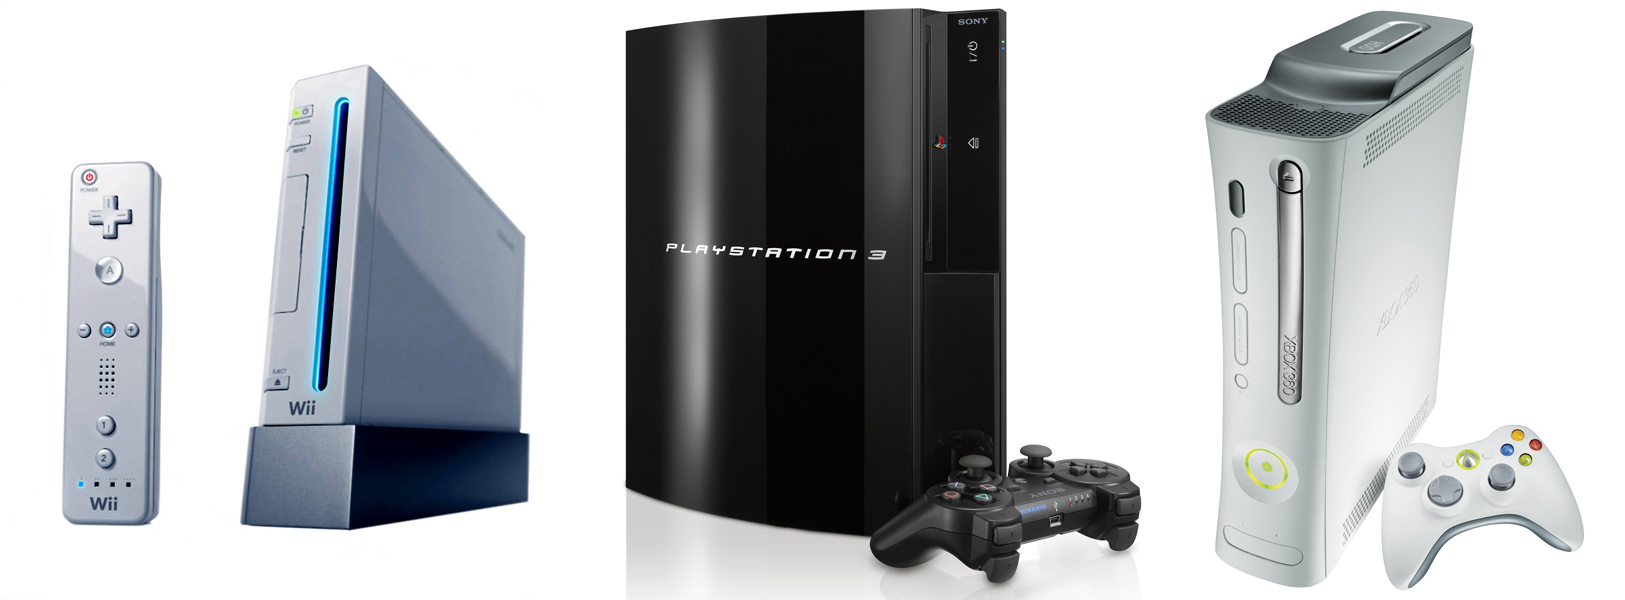 consoles-ps3-wii-xbox-360.jpg